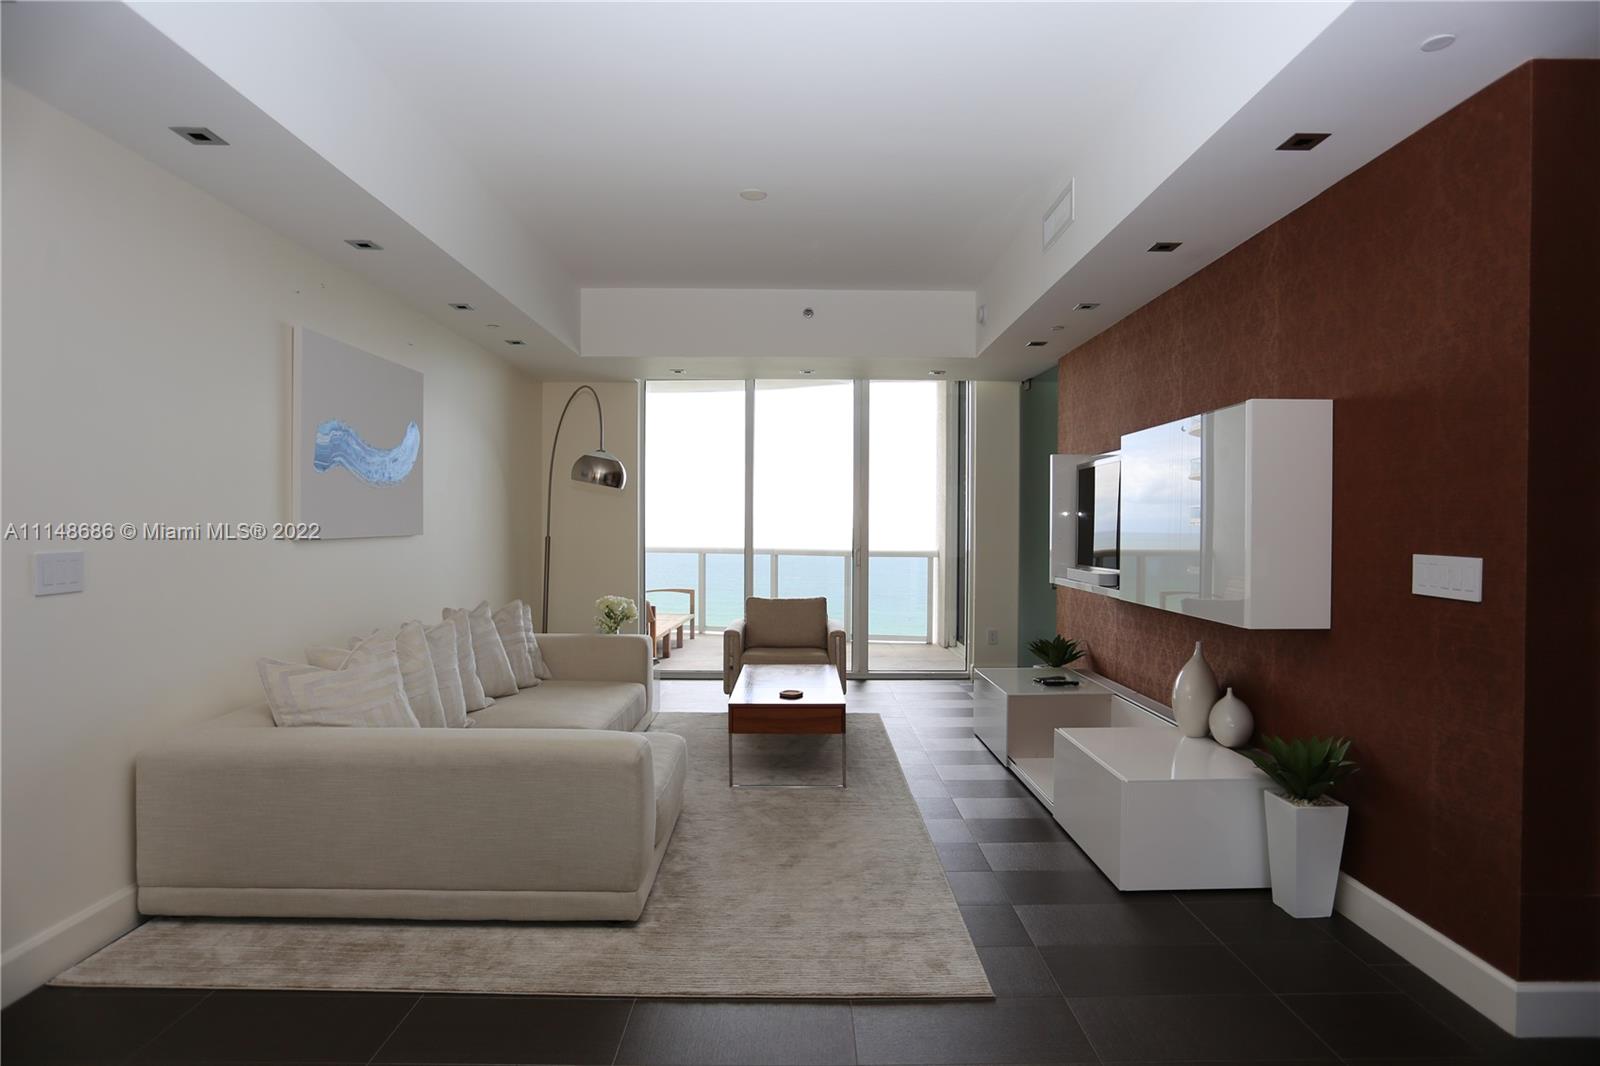 16001  Collins Ave #804 For Sale A11148686, FL